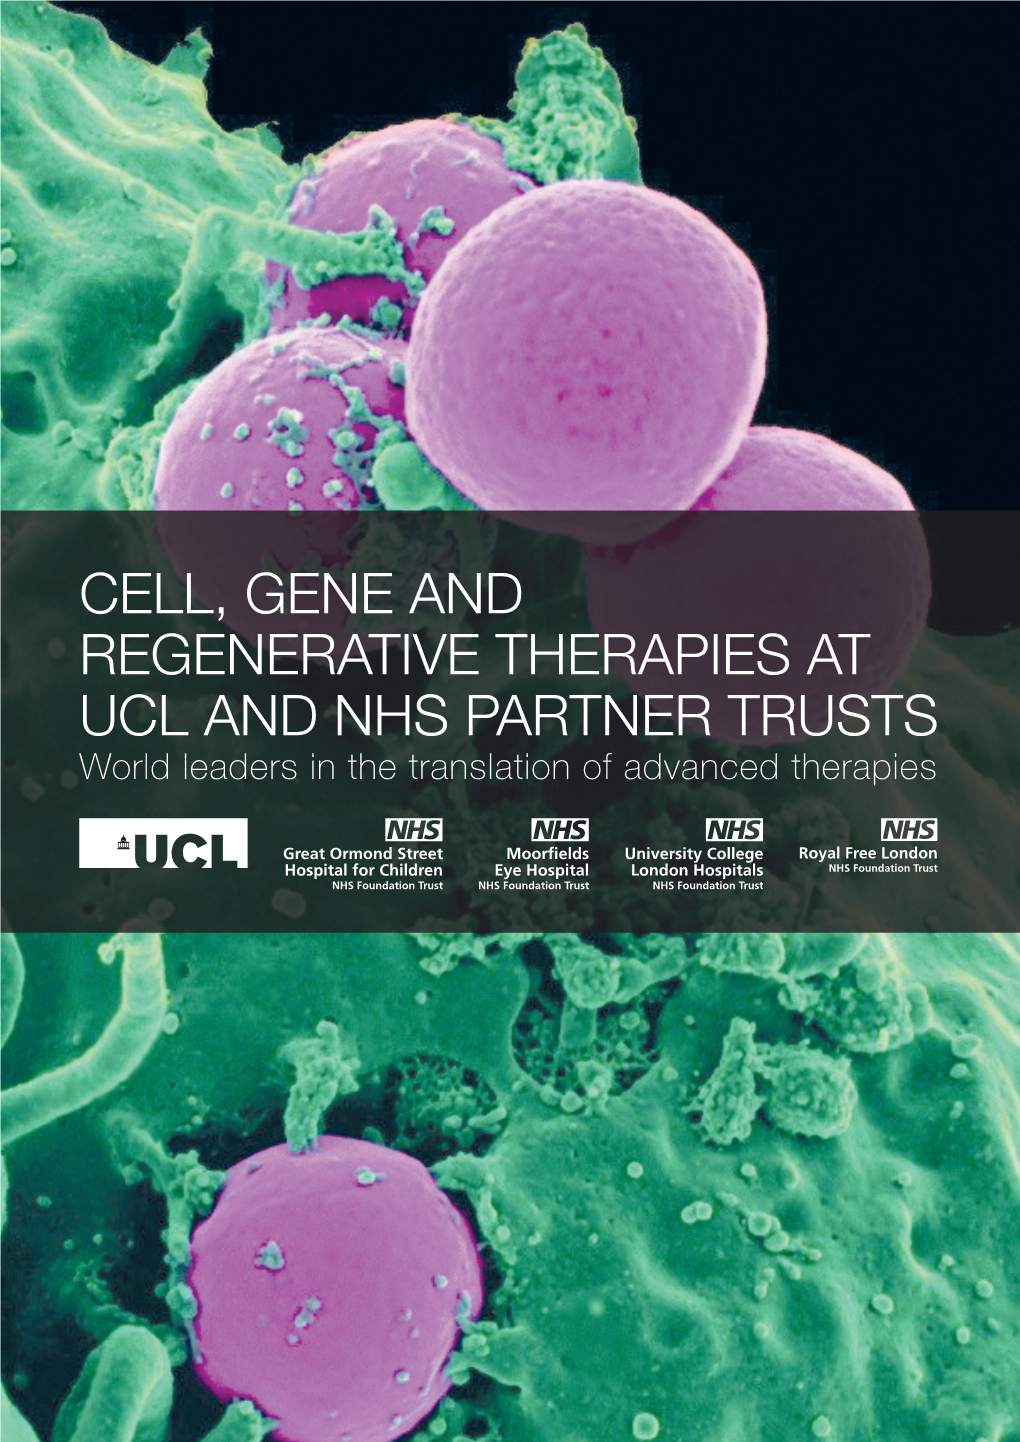 CELL, GENE and REGENERATIVE THERAPIES at UCL and NHS PARTNER TRUSTS World Leaders in the Translation of Advanced Therapies